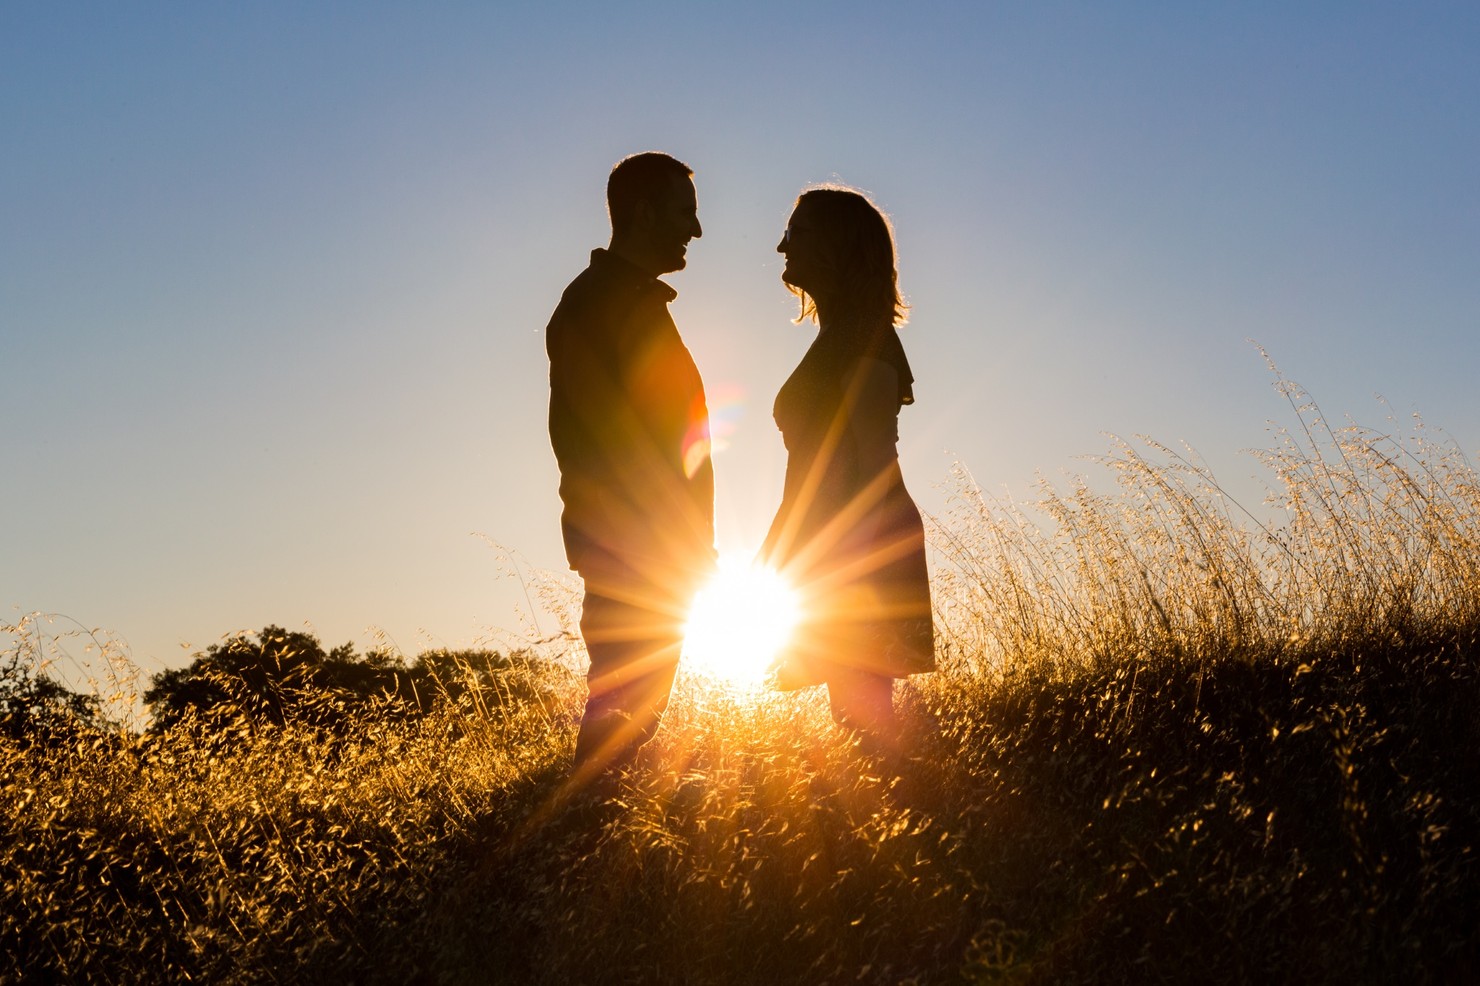 Two people standing close together with the sun setting between them.